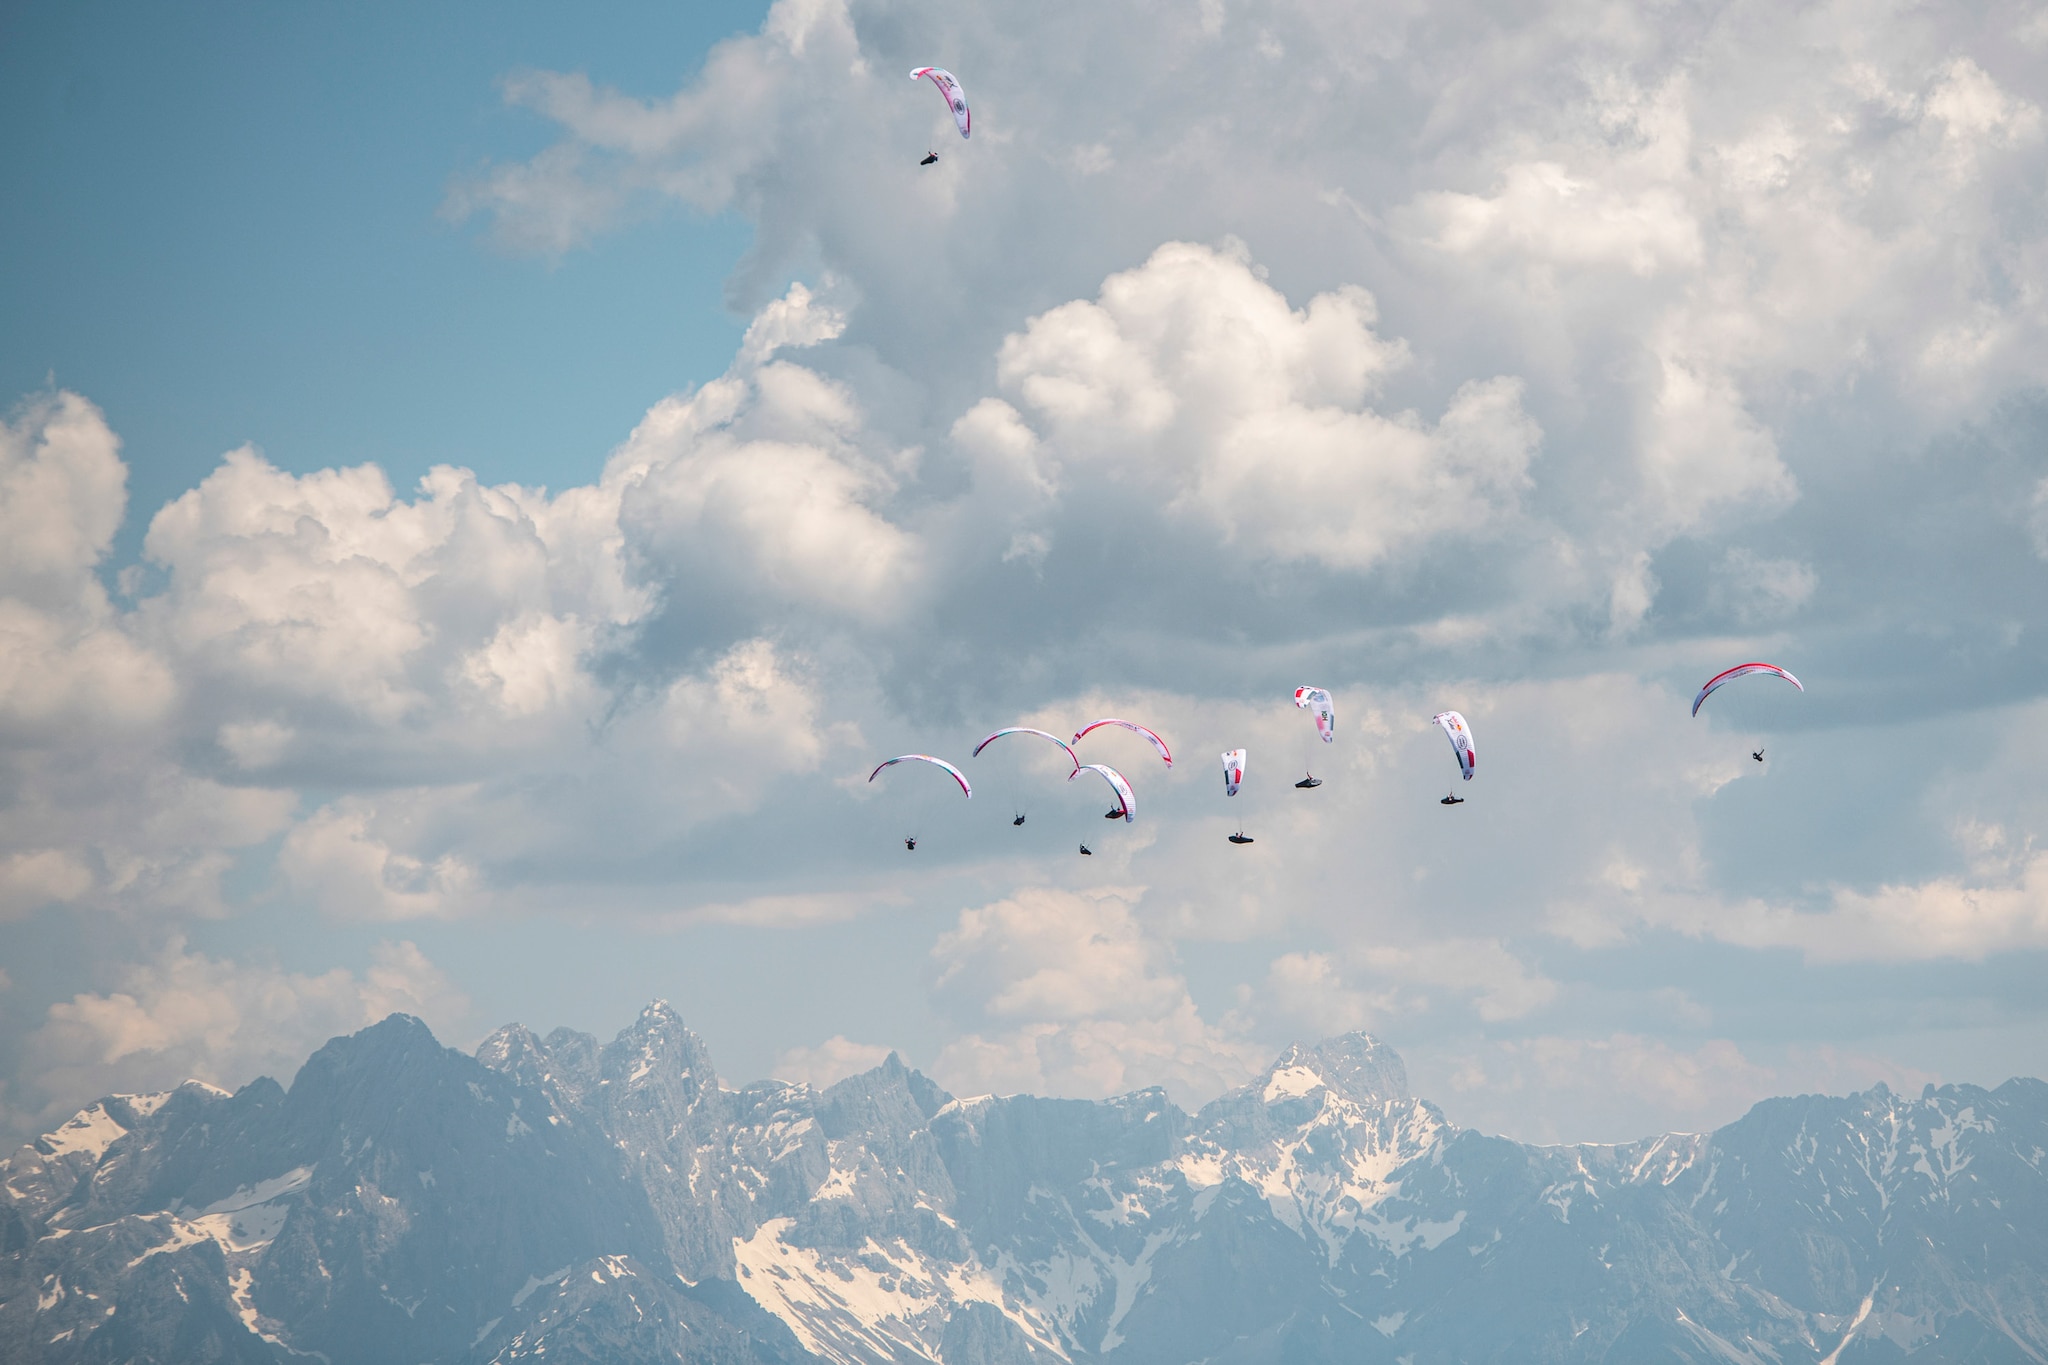 Athletes perform at the prologue of the Red Bull X-Alps in Wagrain-Kleinarl on June 17, 2021.